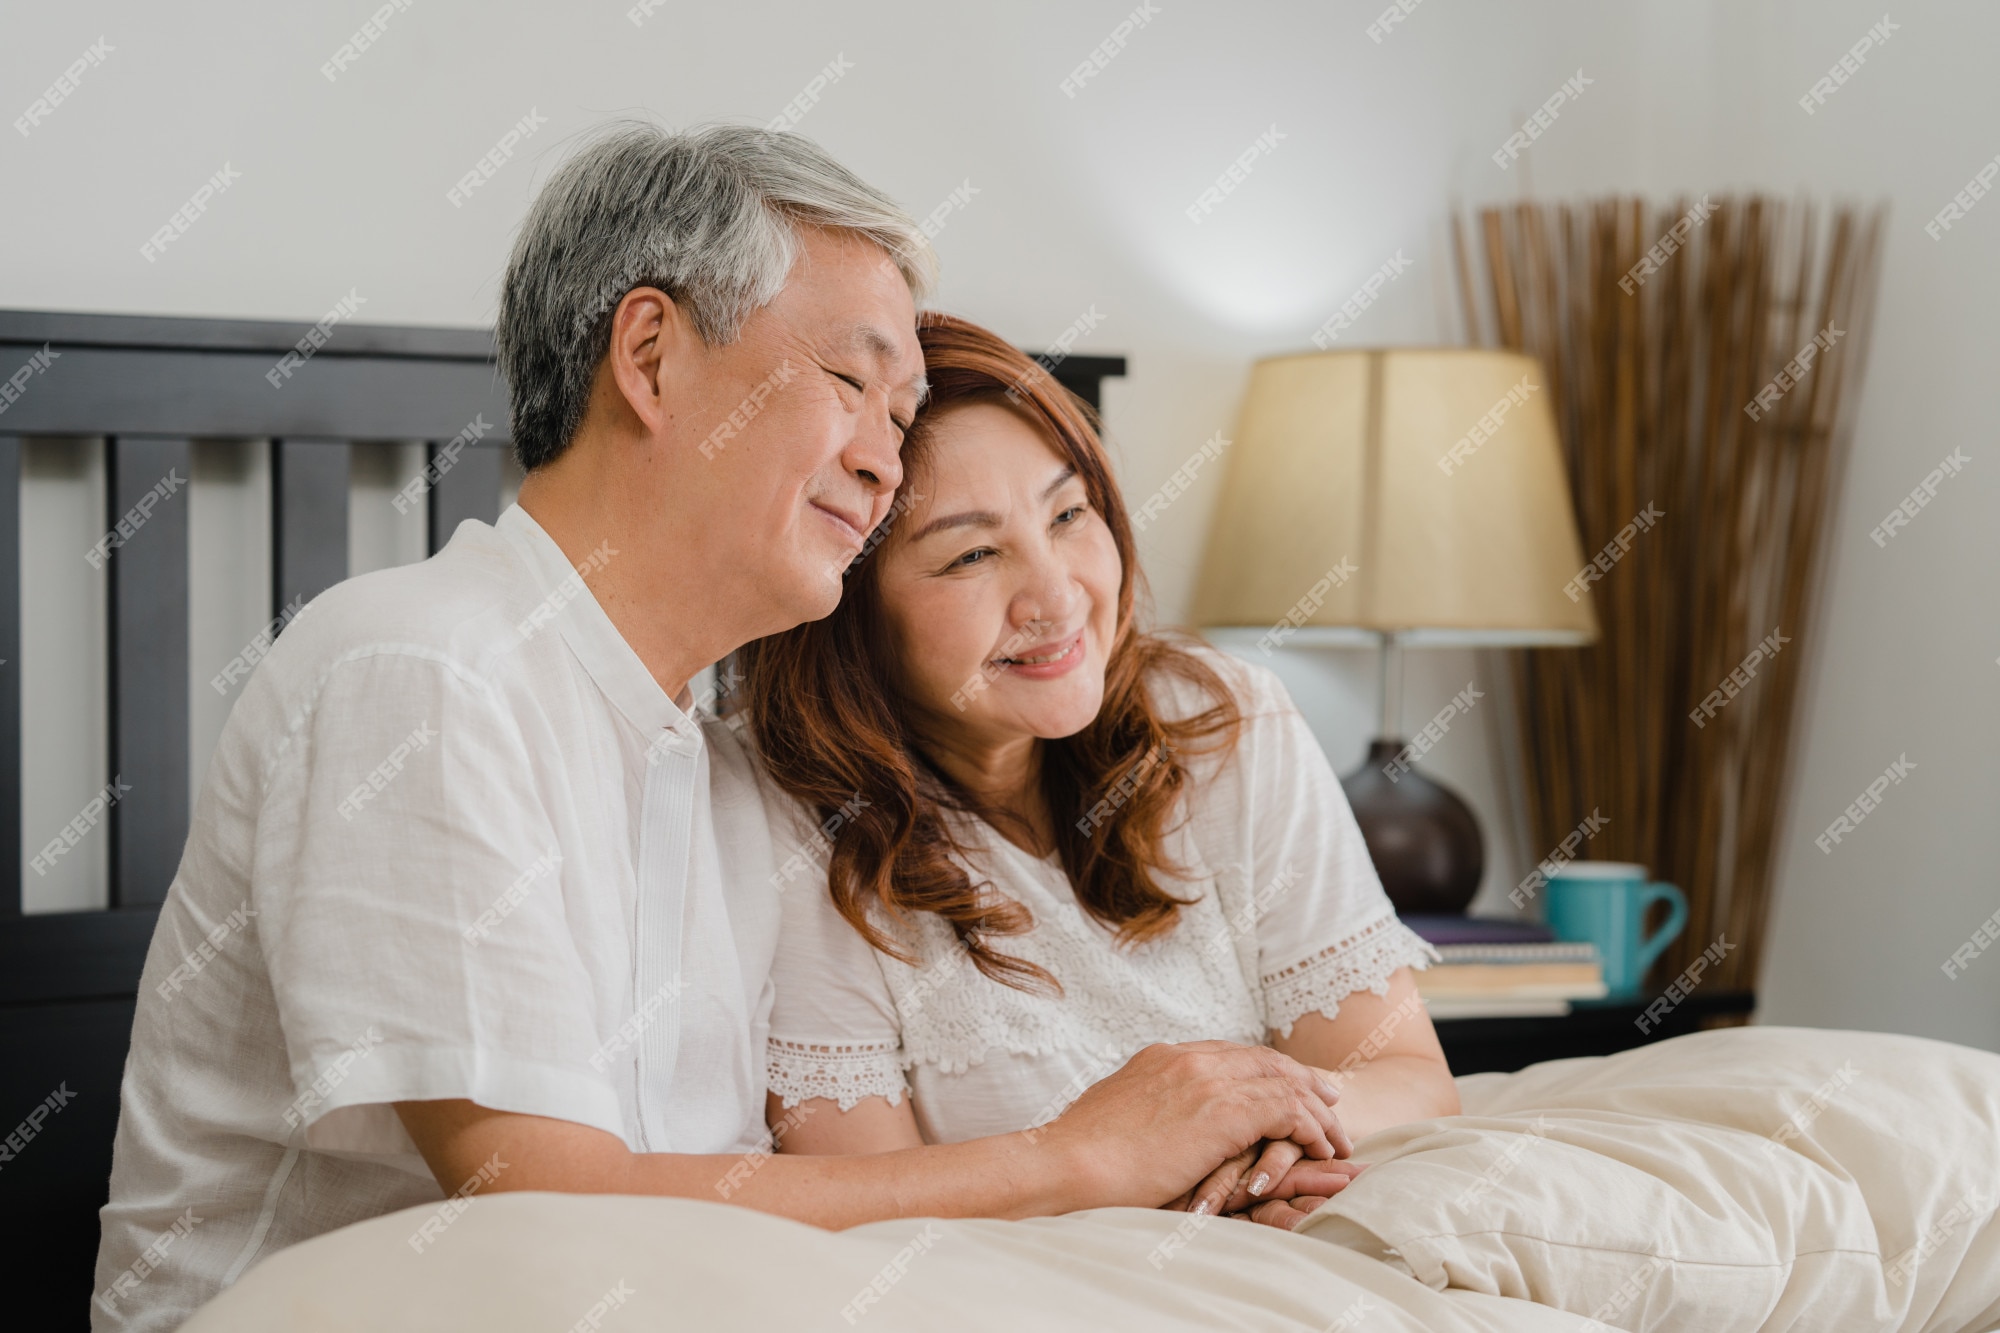 Older asian couple Images | Free Vectors, Stock Photos & PSD